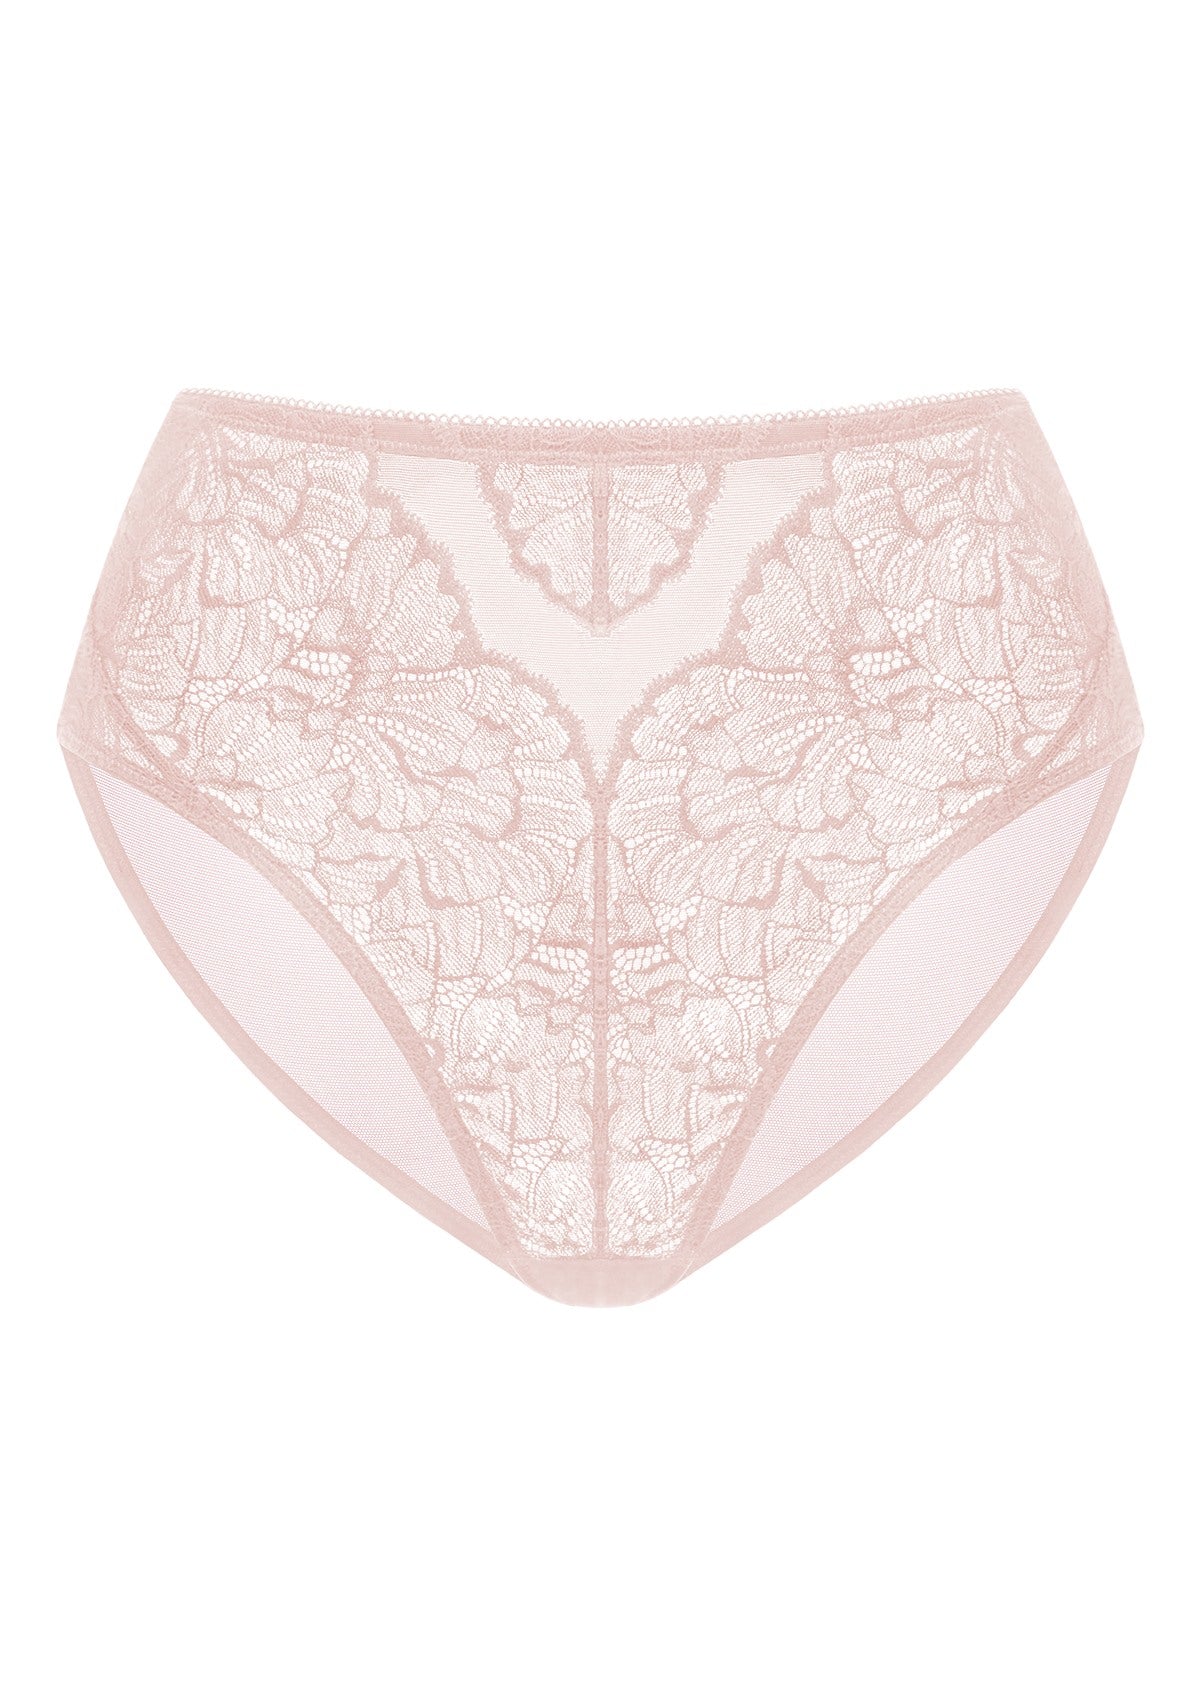 HSIA Blossom High-Rise Floral Lacy Panty-Comfort In Style - L / Dark Pink